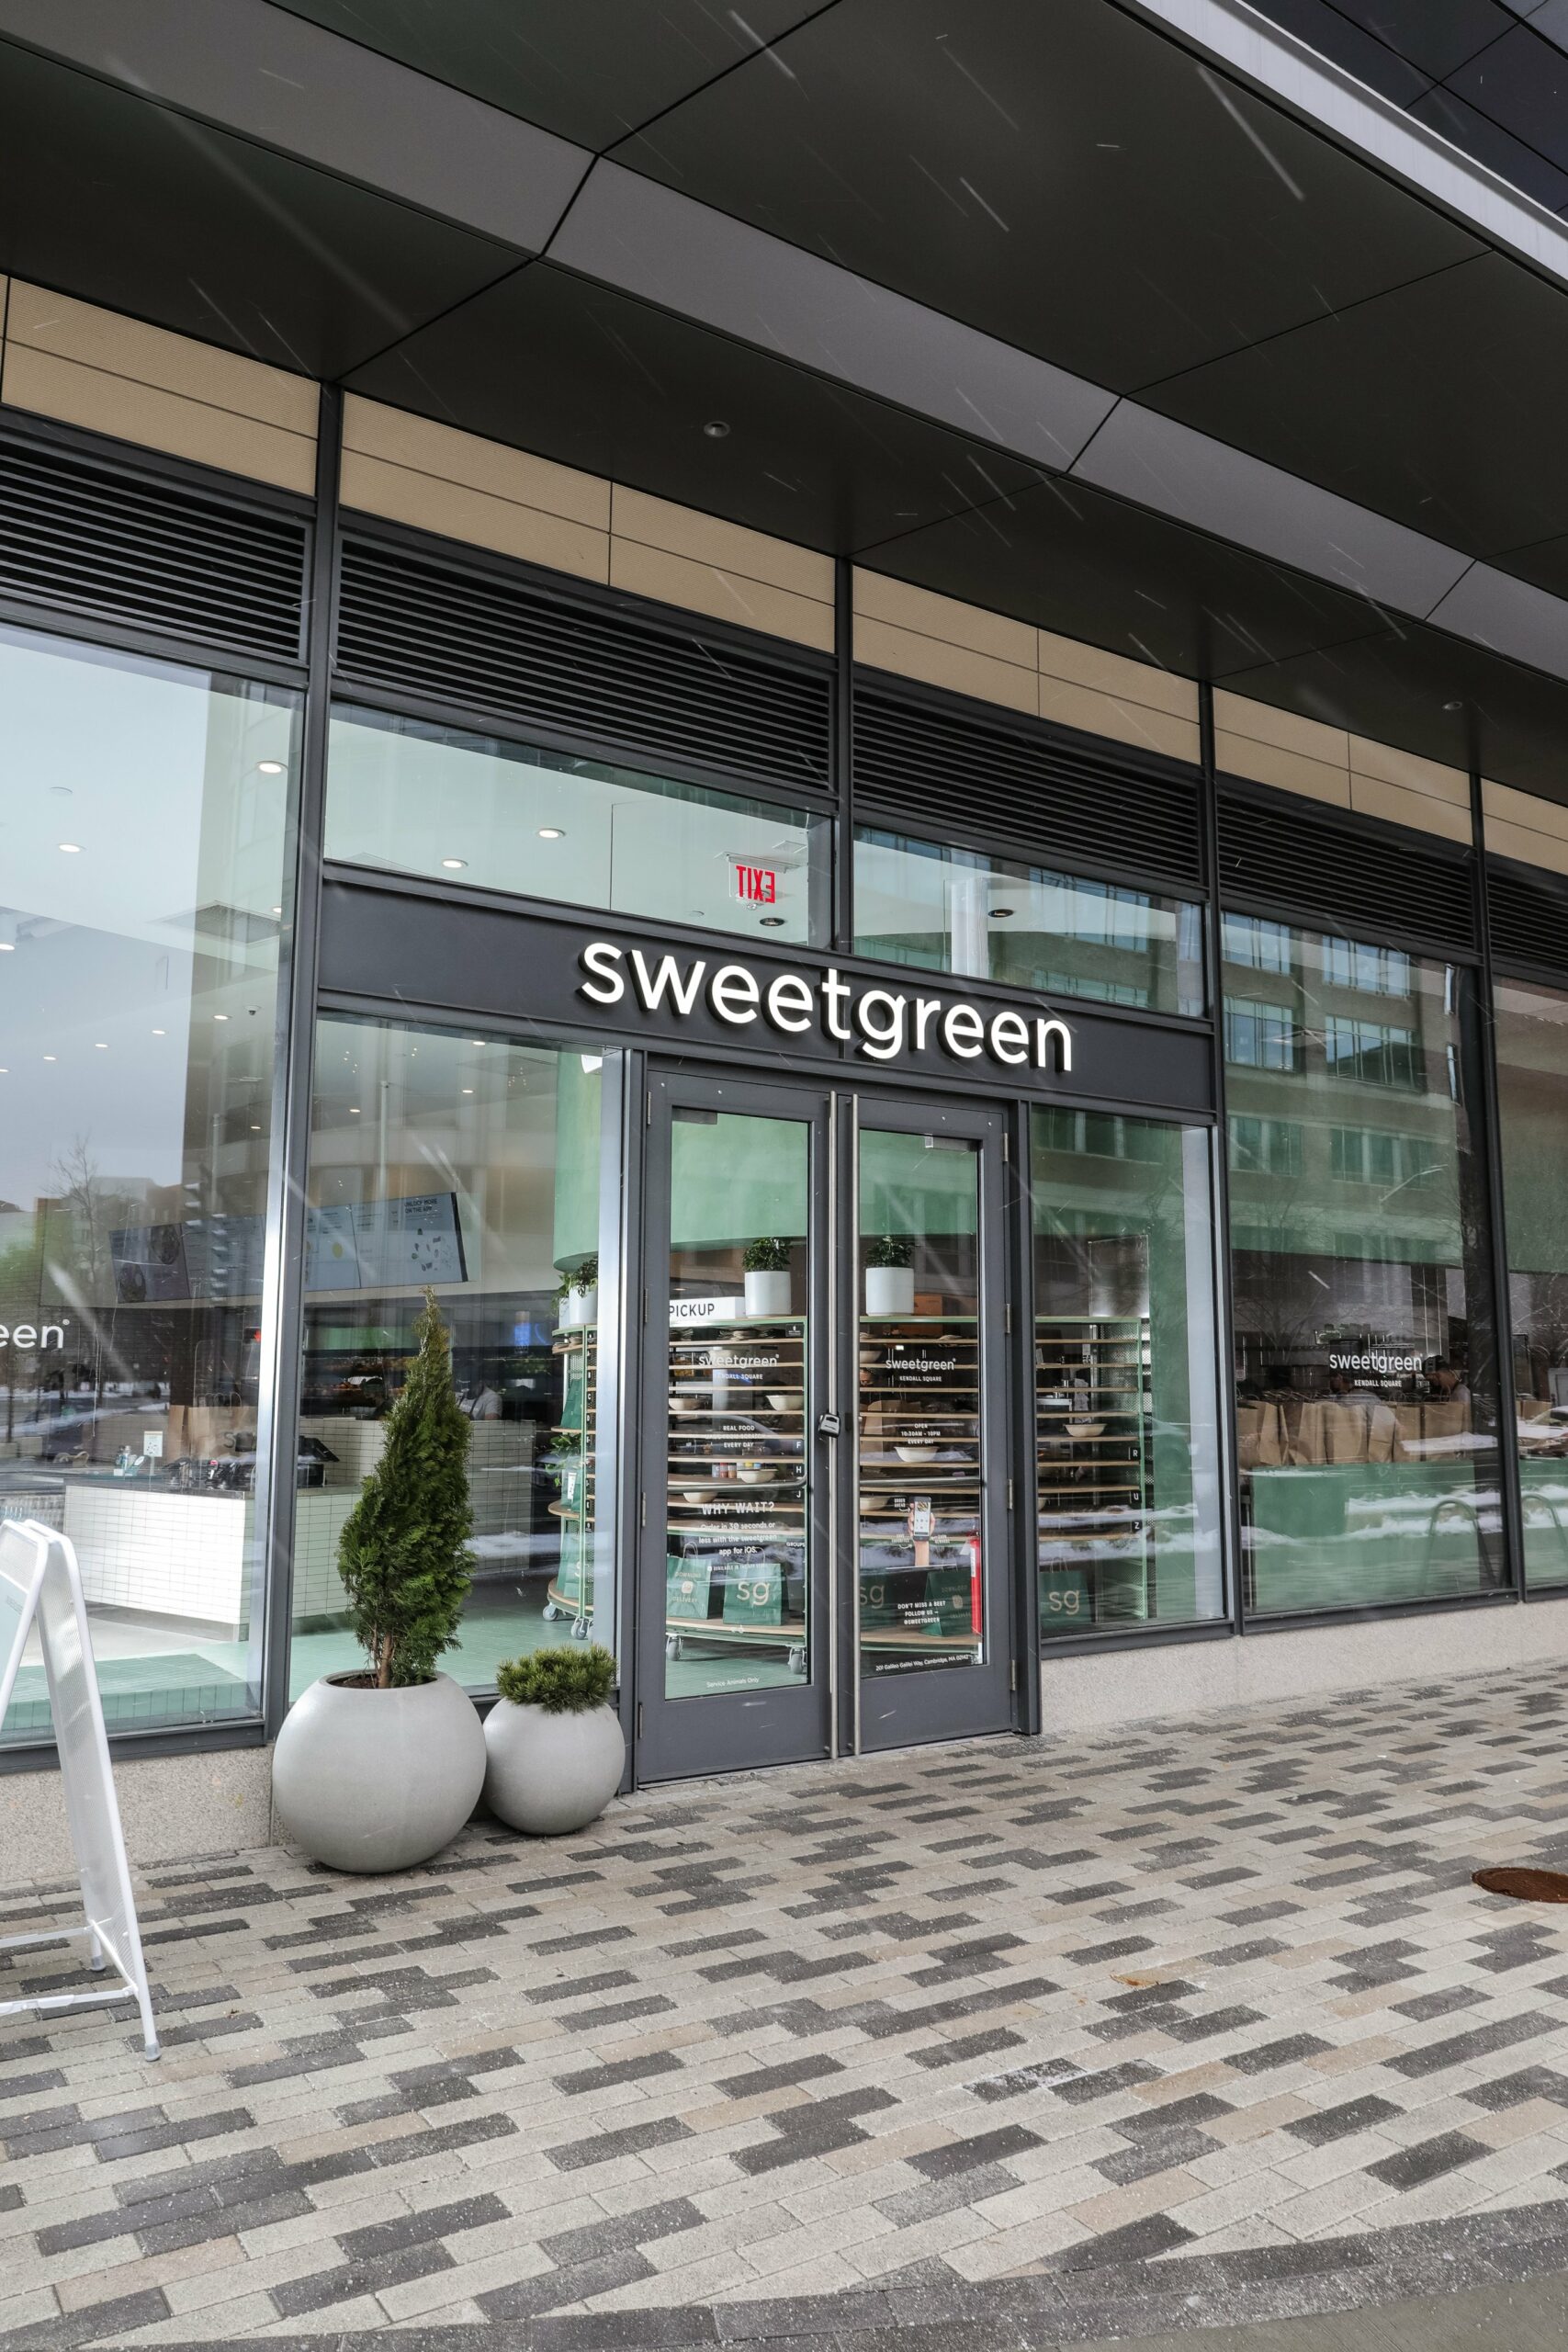 SweetGreen in Kendall Square